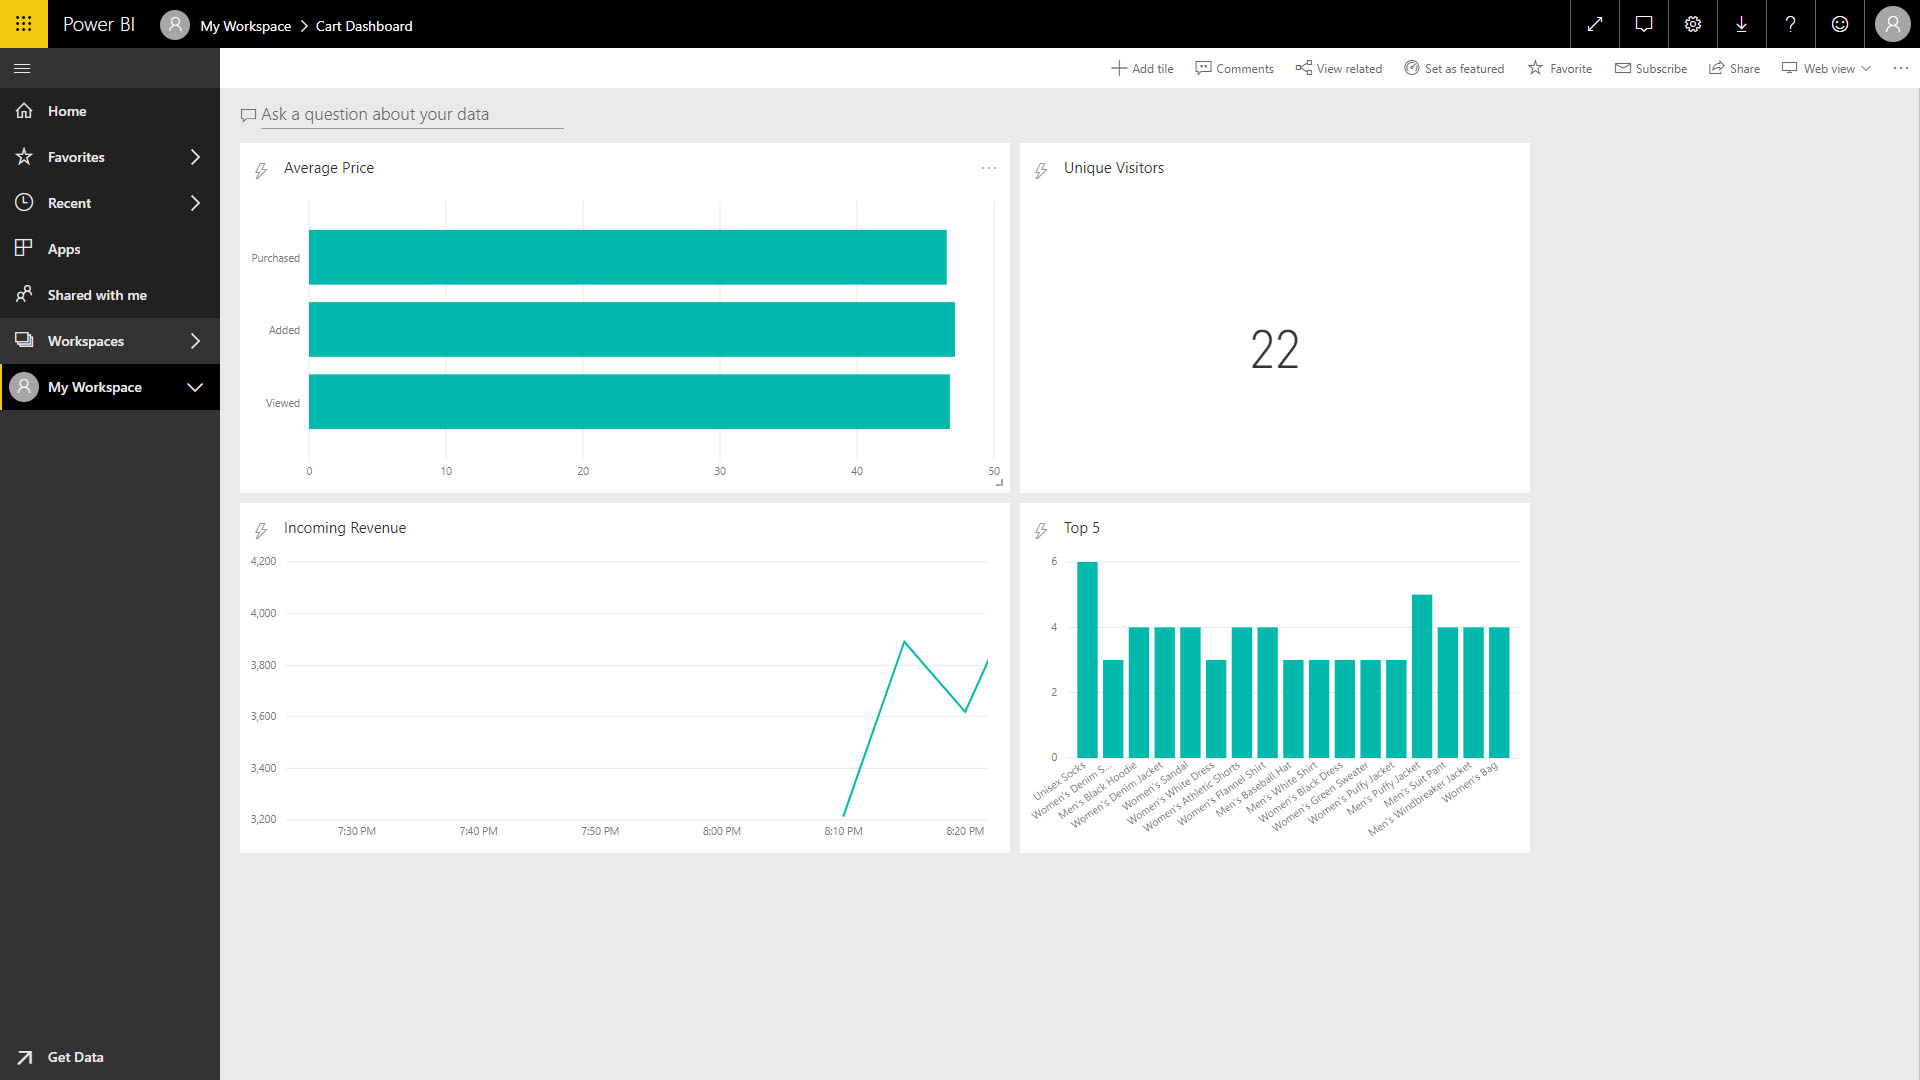 The Final Power BI Dashboard is displayed with real-time data flowing